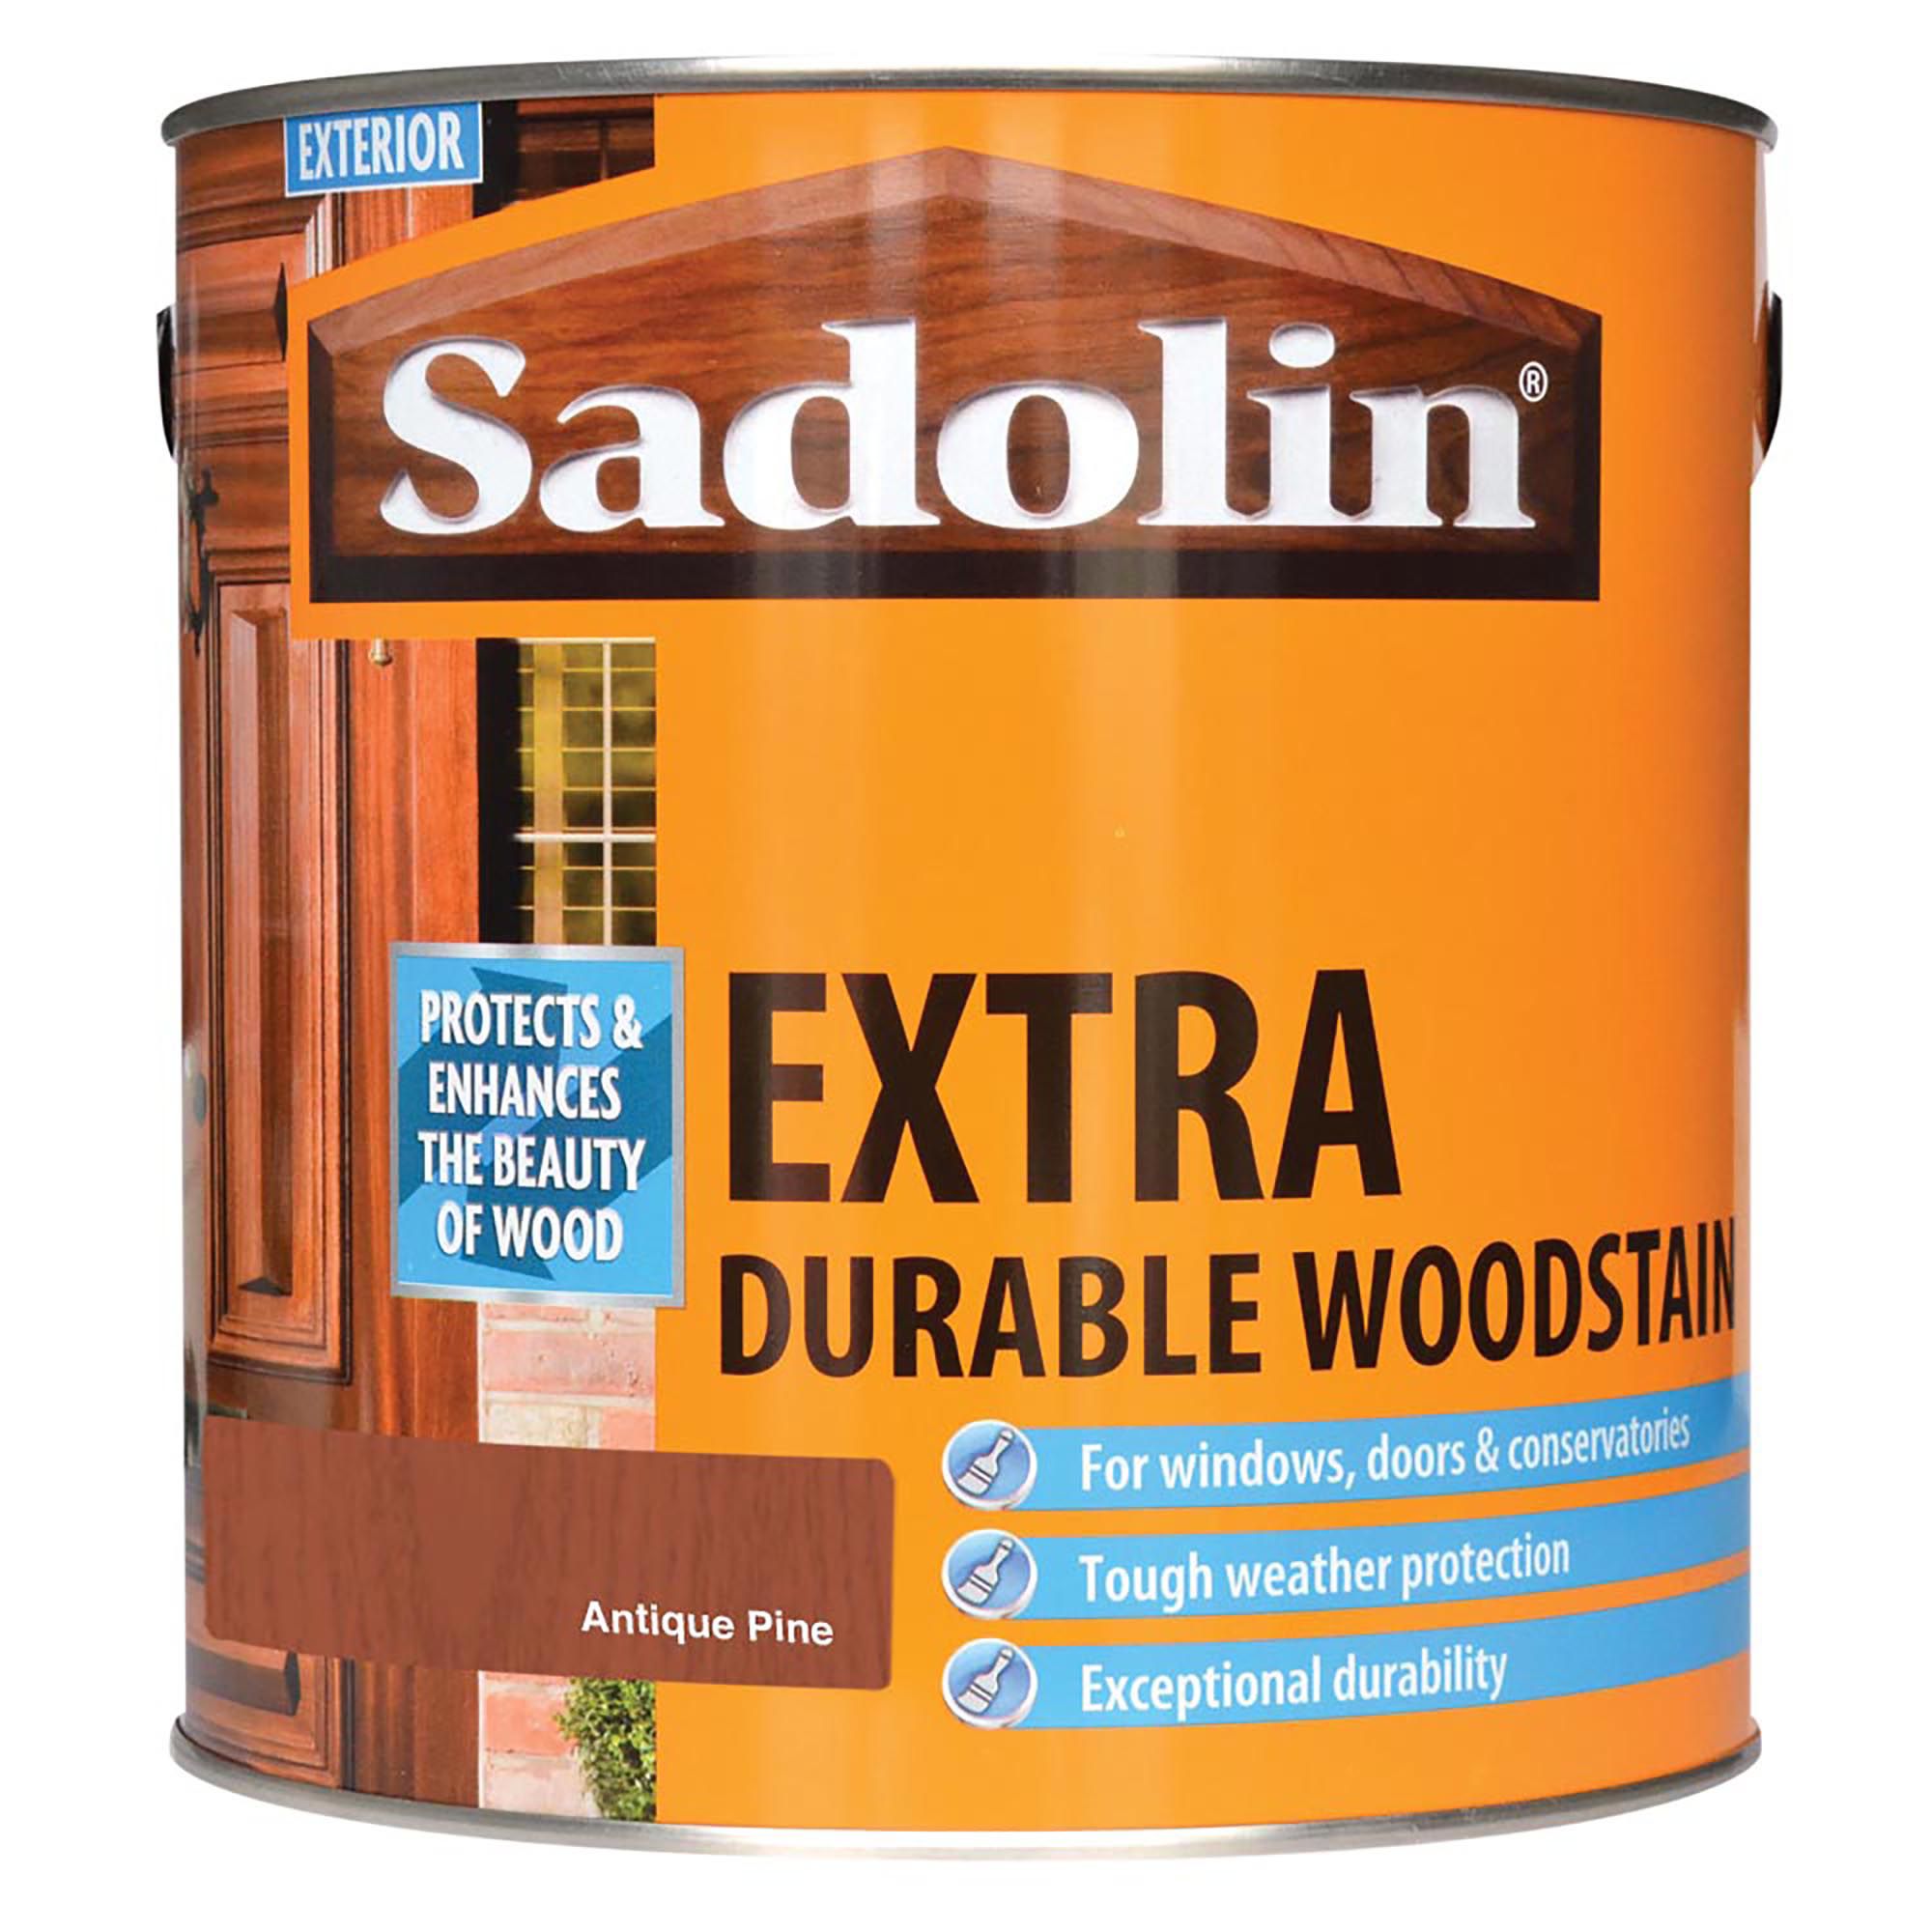 Sadolin Extra Durable Woodstain - Antique Pine - 2.5L